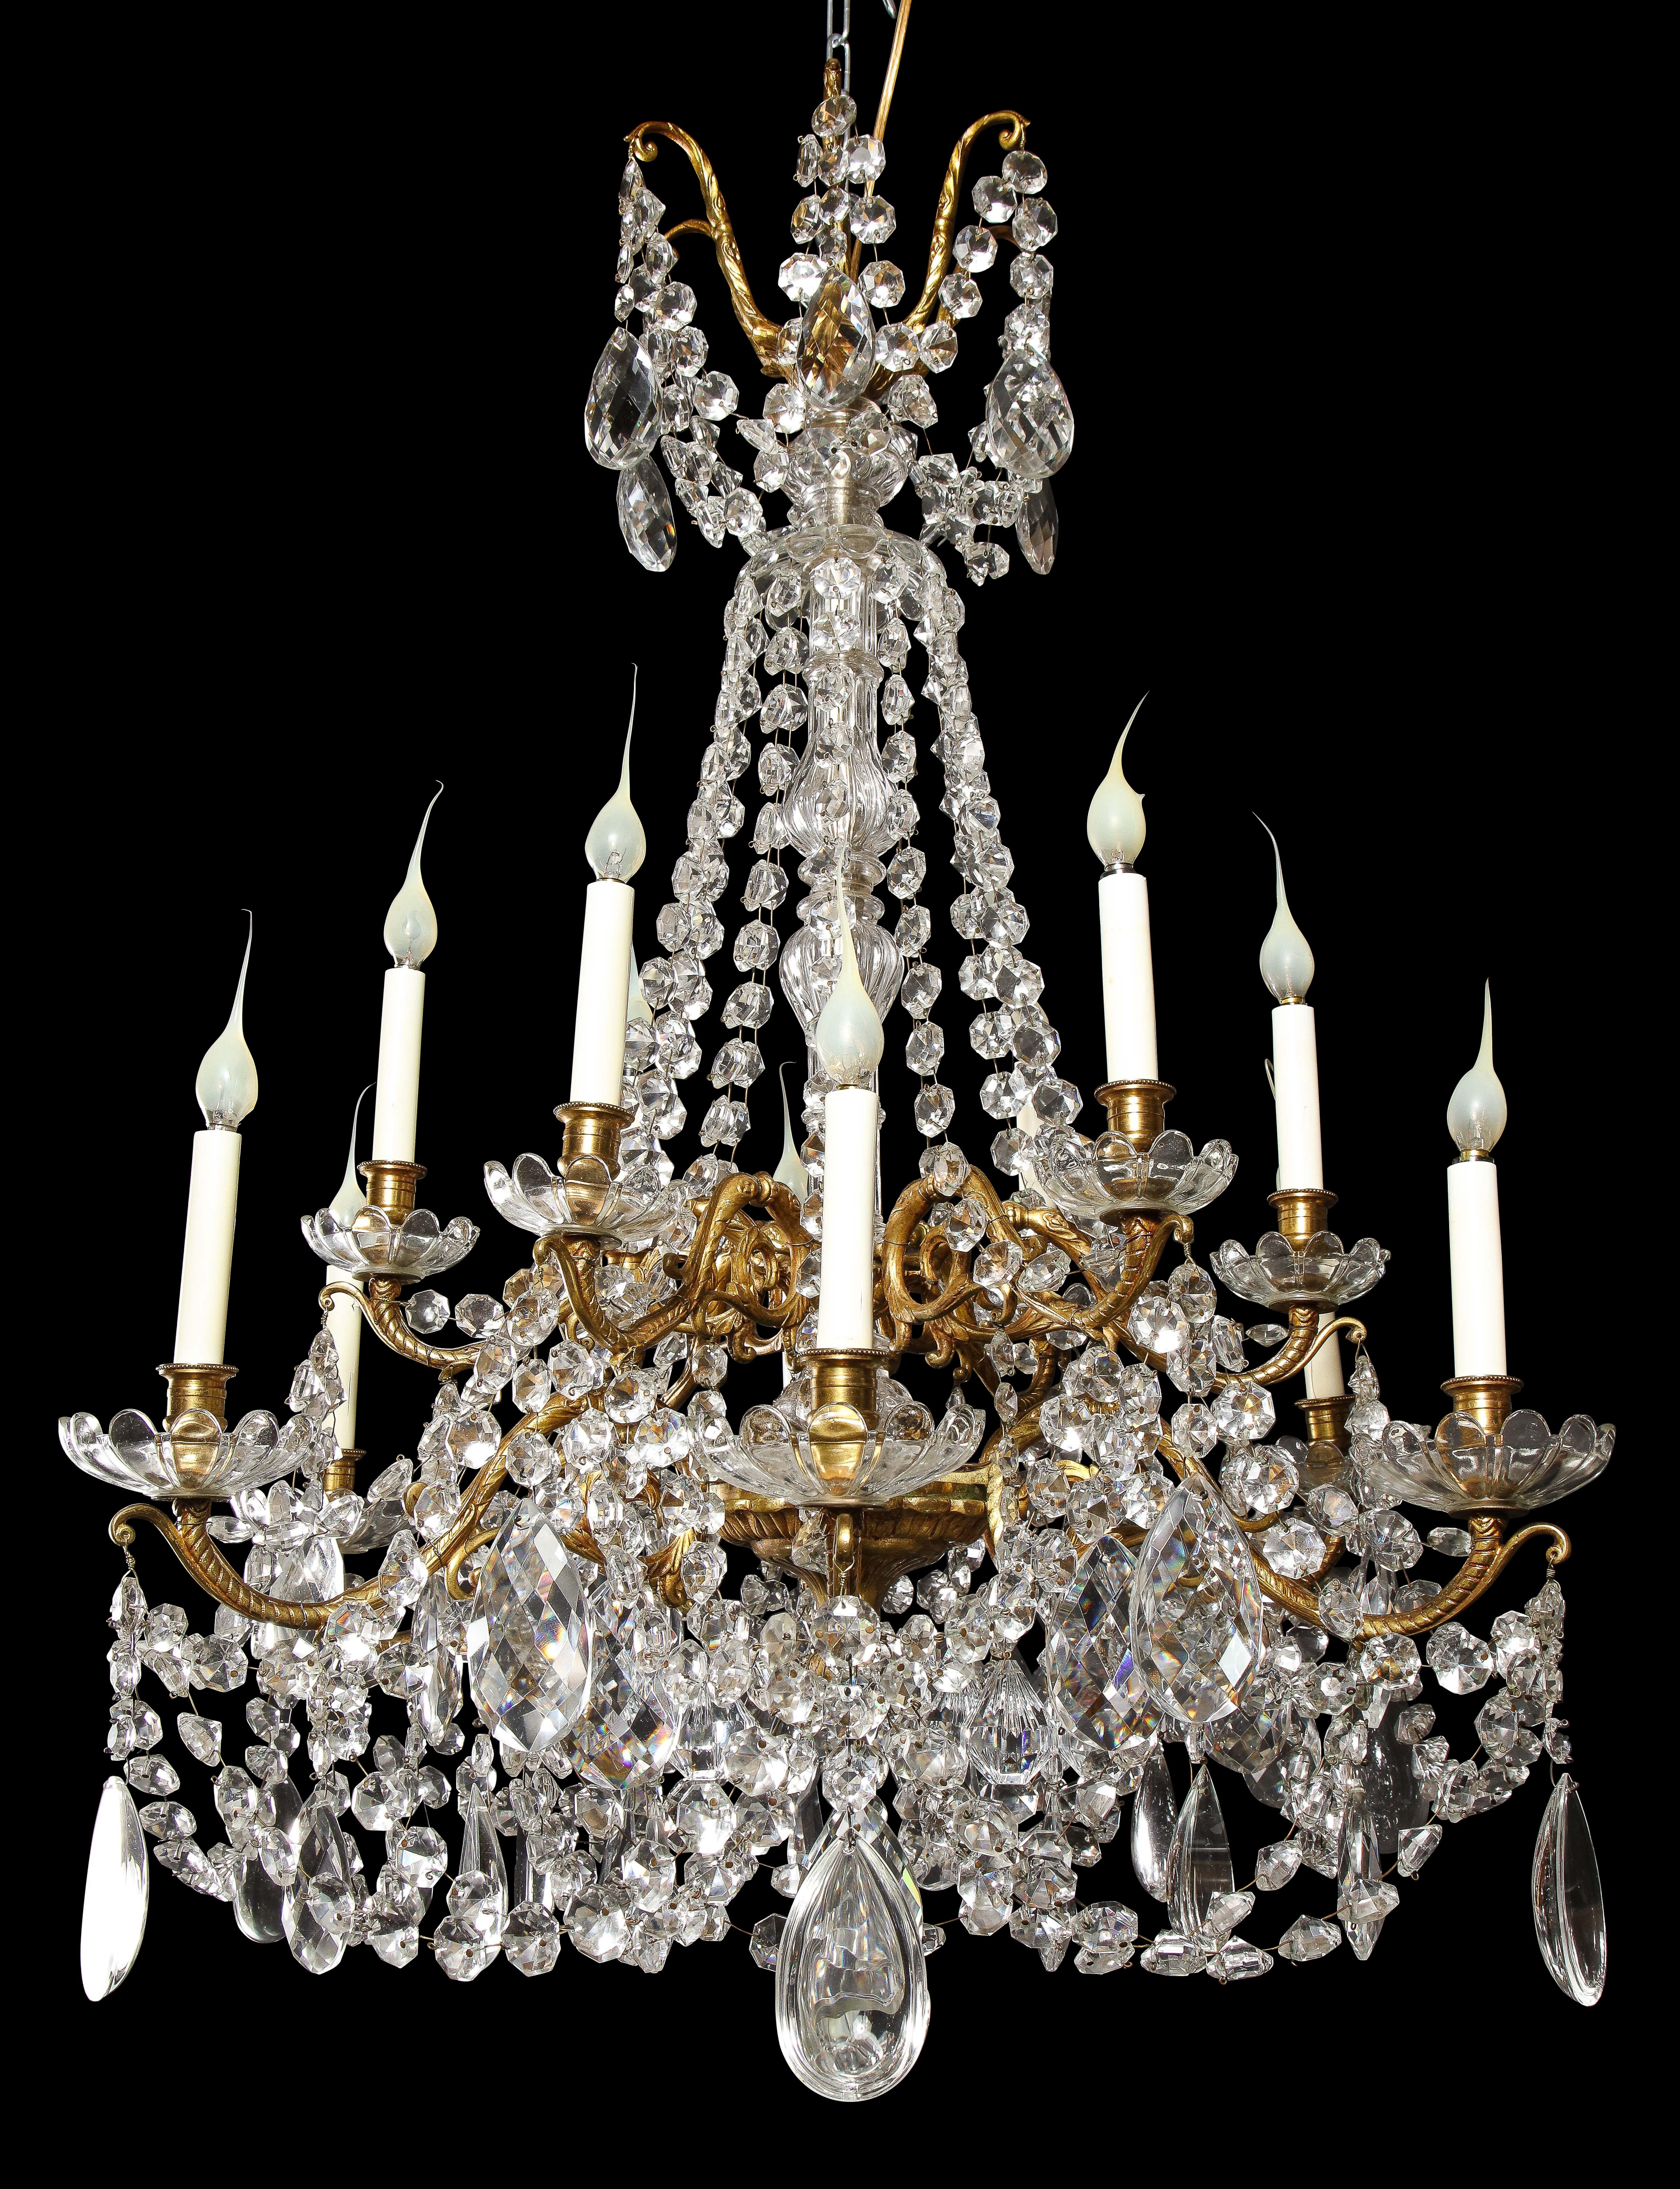 A Superb Large Antique French Louis XVI style gilt bronze, cut crystal and glass twelve arm double tier chandelier of great detail. This fine chandelier consists of 12 gilt bronze arms embellished with glass bolbeches, further adorned with cut